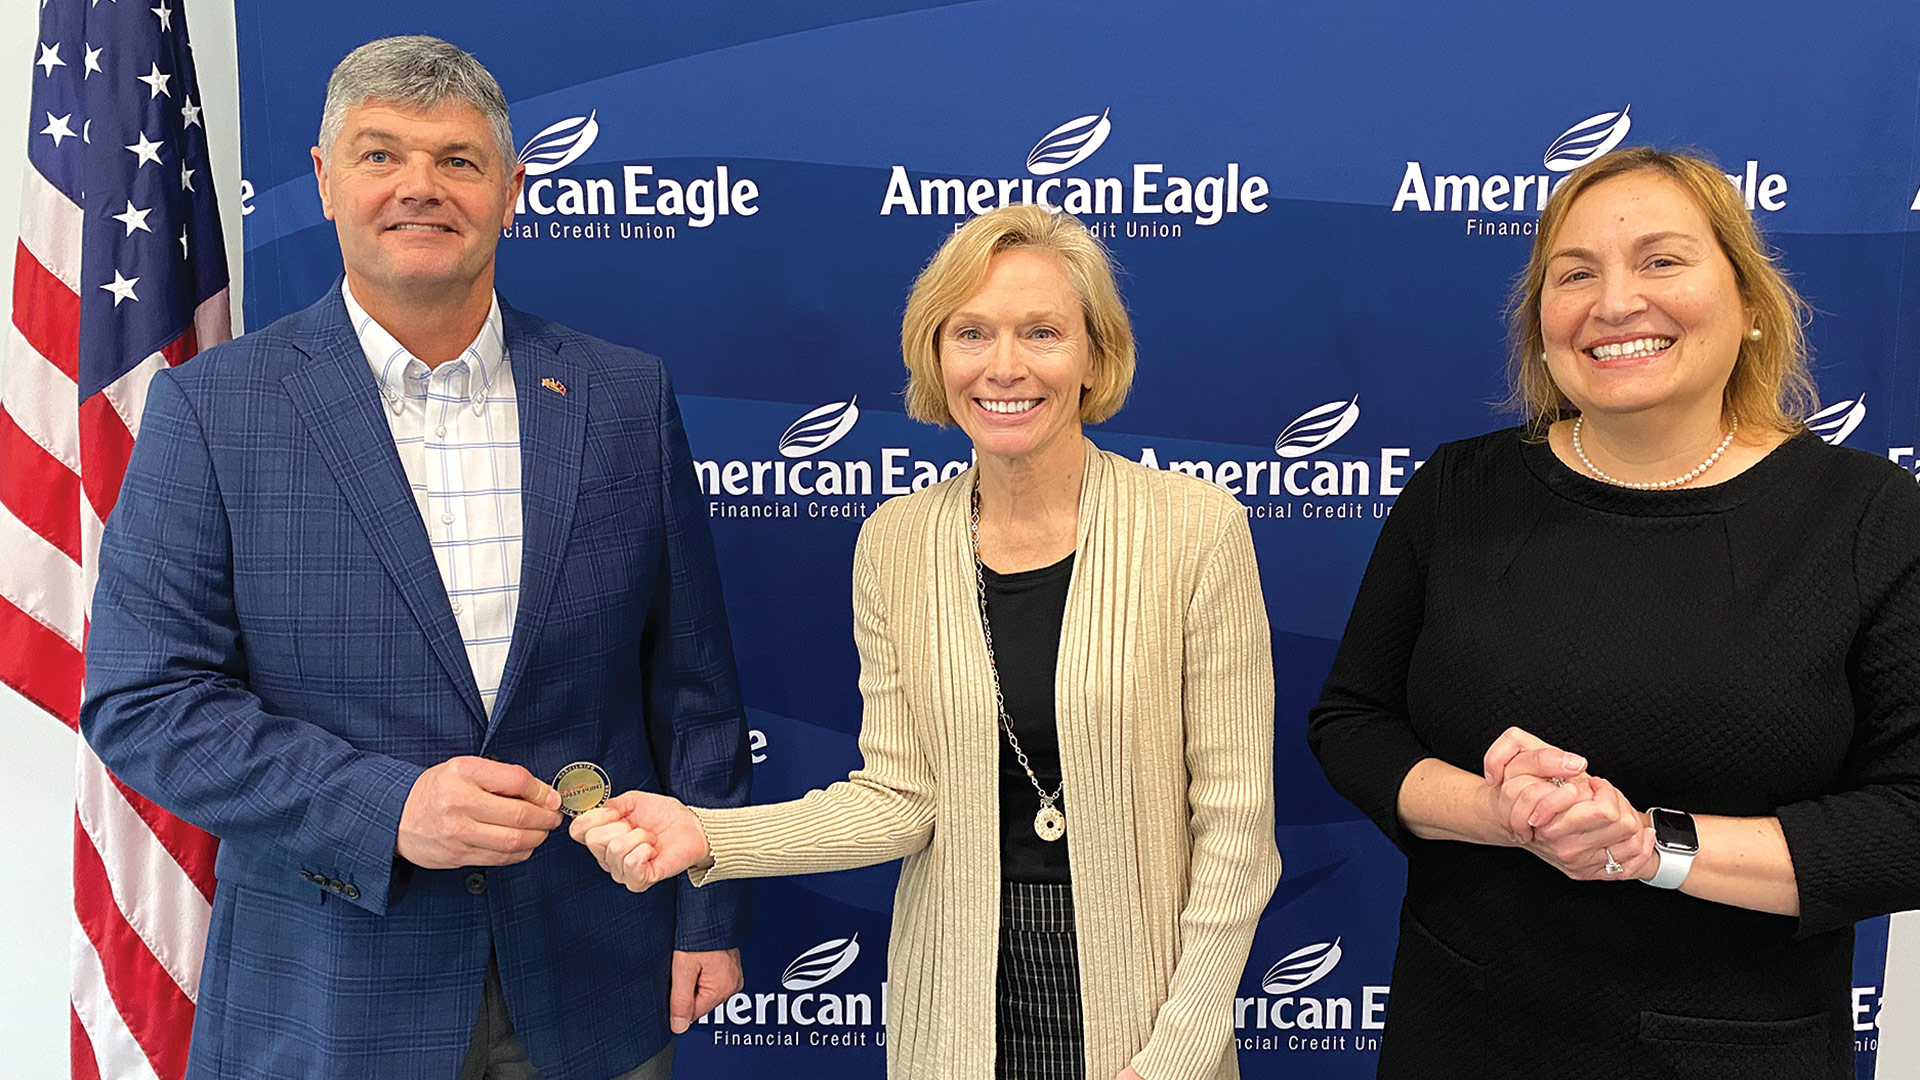 Pictured, from left: Brig. Gen. Ron Welch of Veterans Rally Point, Teresa Knox of American Eagle Financial Credit Union, and Wendy Archer of Easterseals Capital Region & Eastern Connecticut.